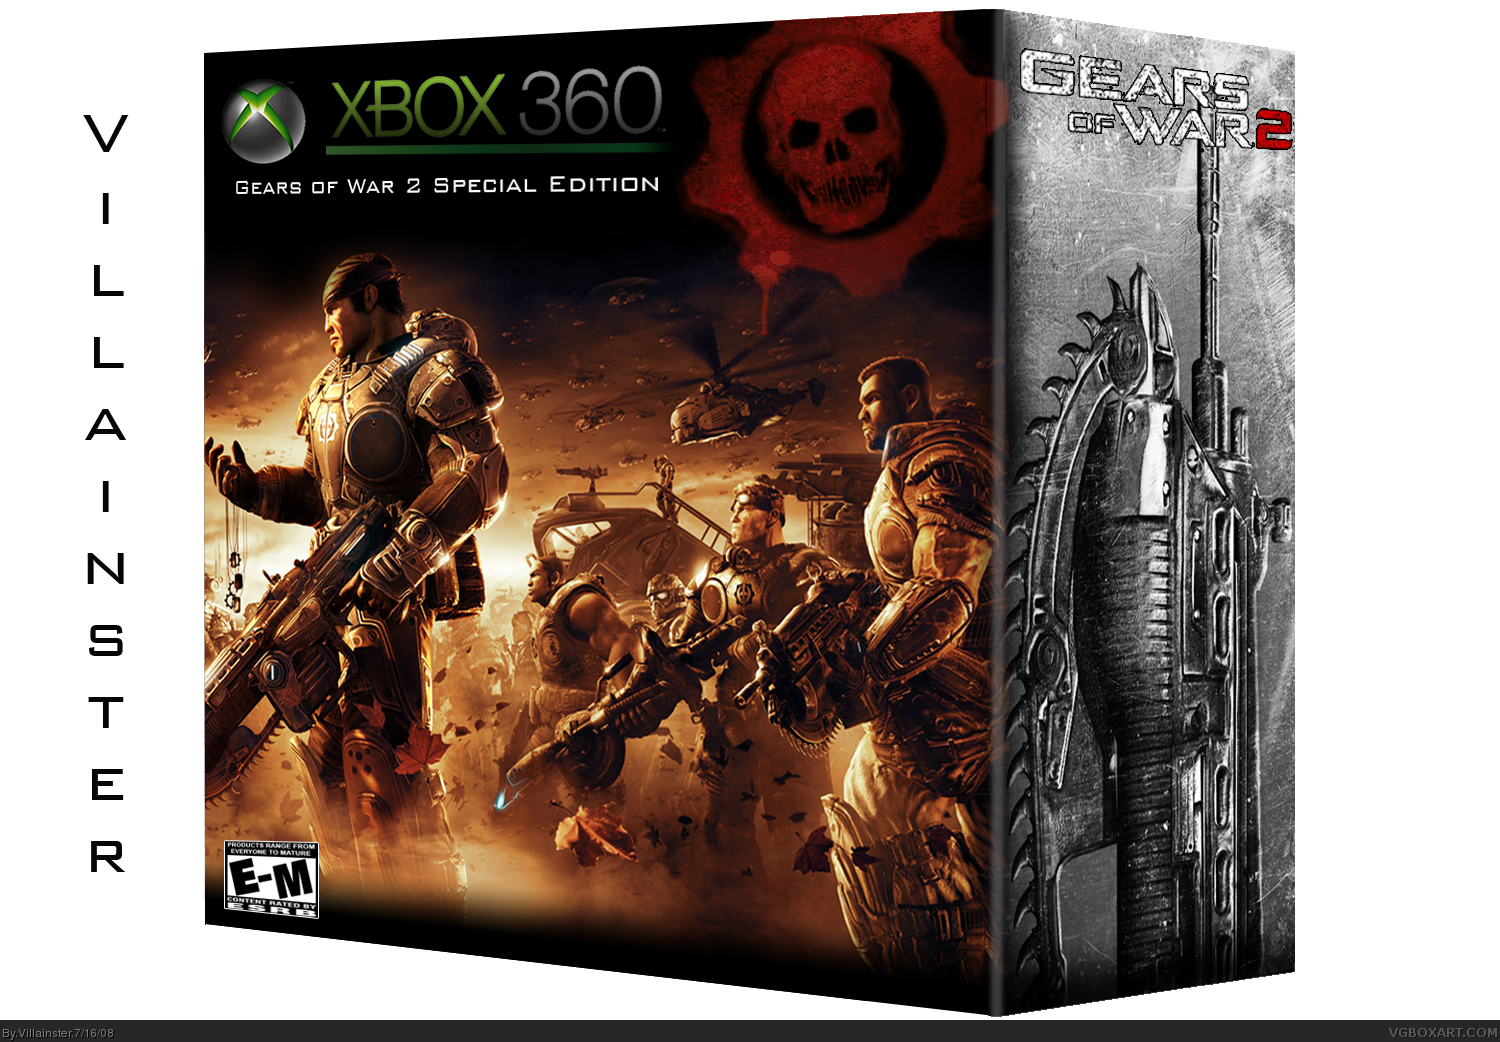 Gears of War 2 Special Edition XBOX 360 box cover